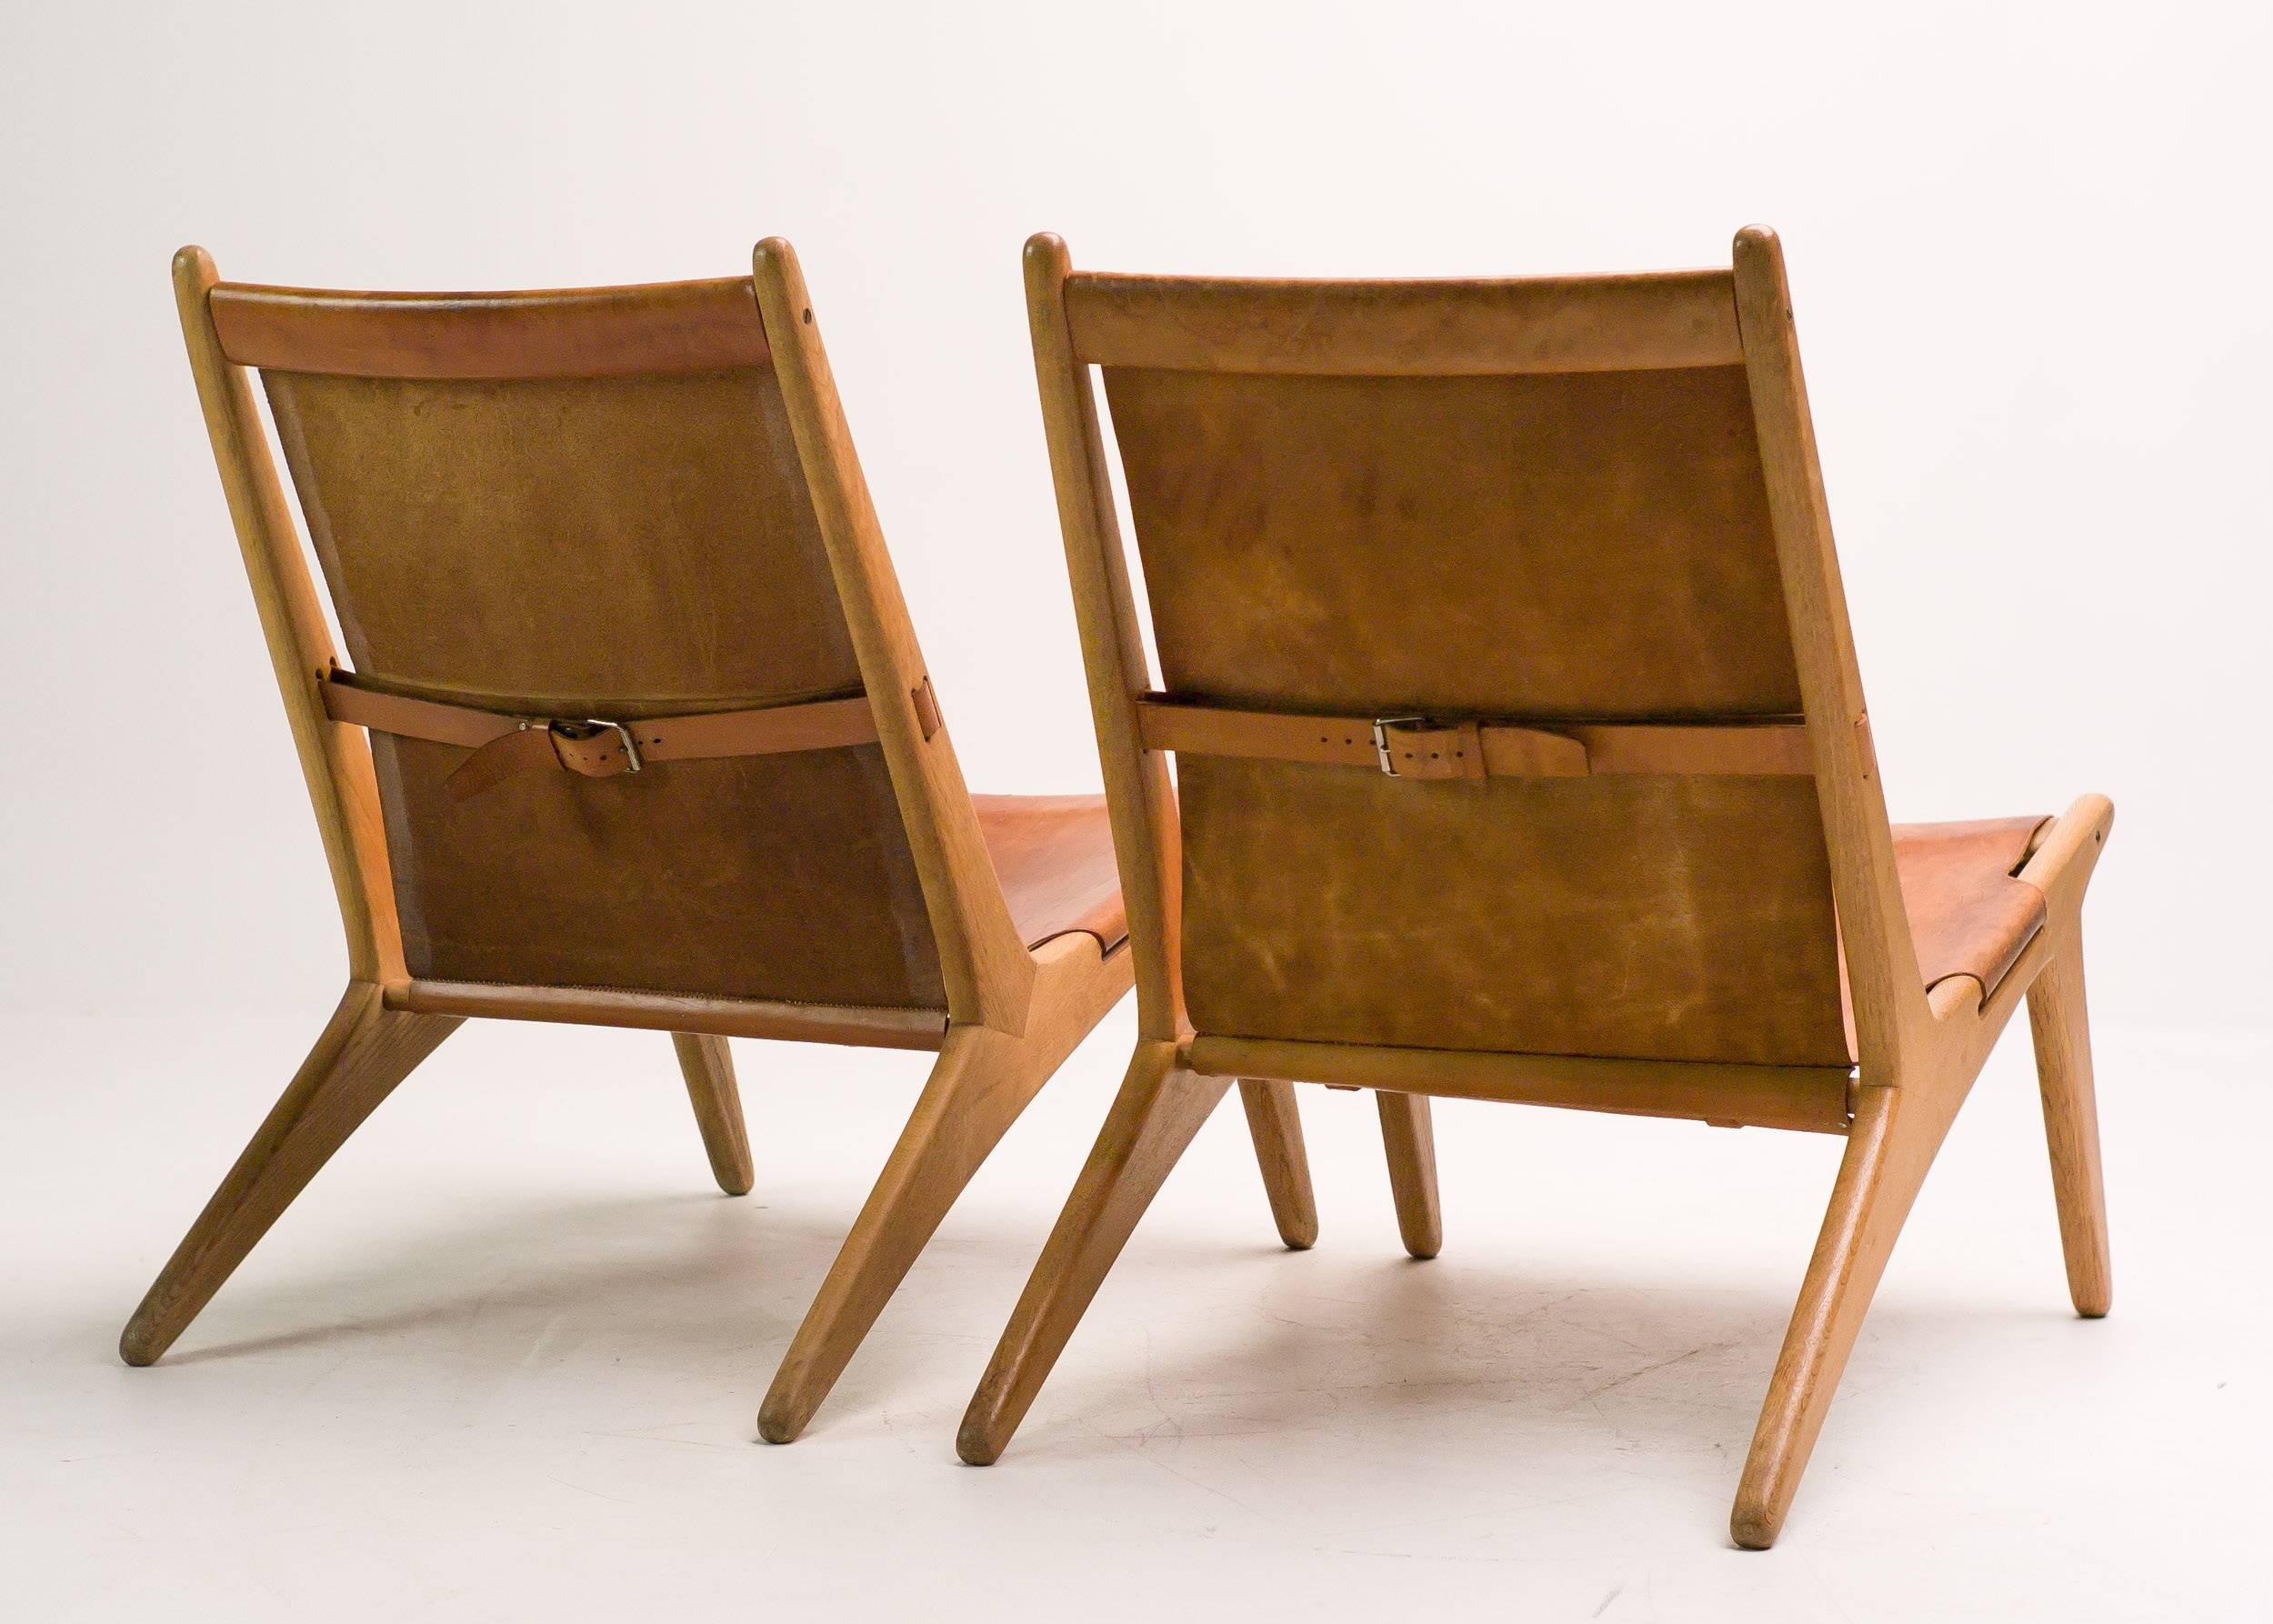 Swedish Pair of Hunting Chairs Model 204 by Uno and Osten Kristiansson